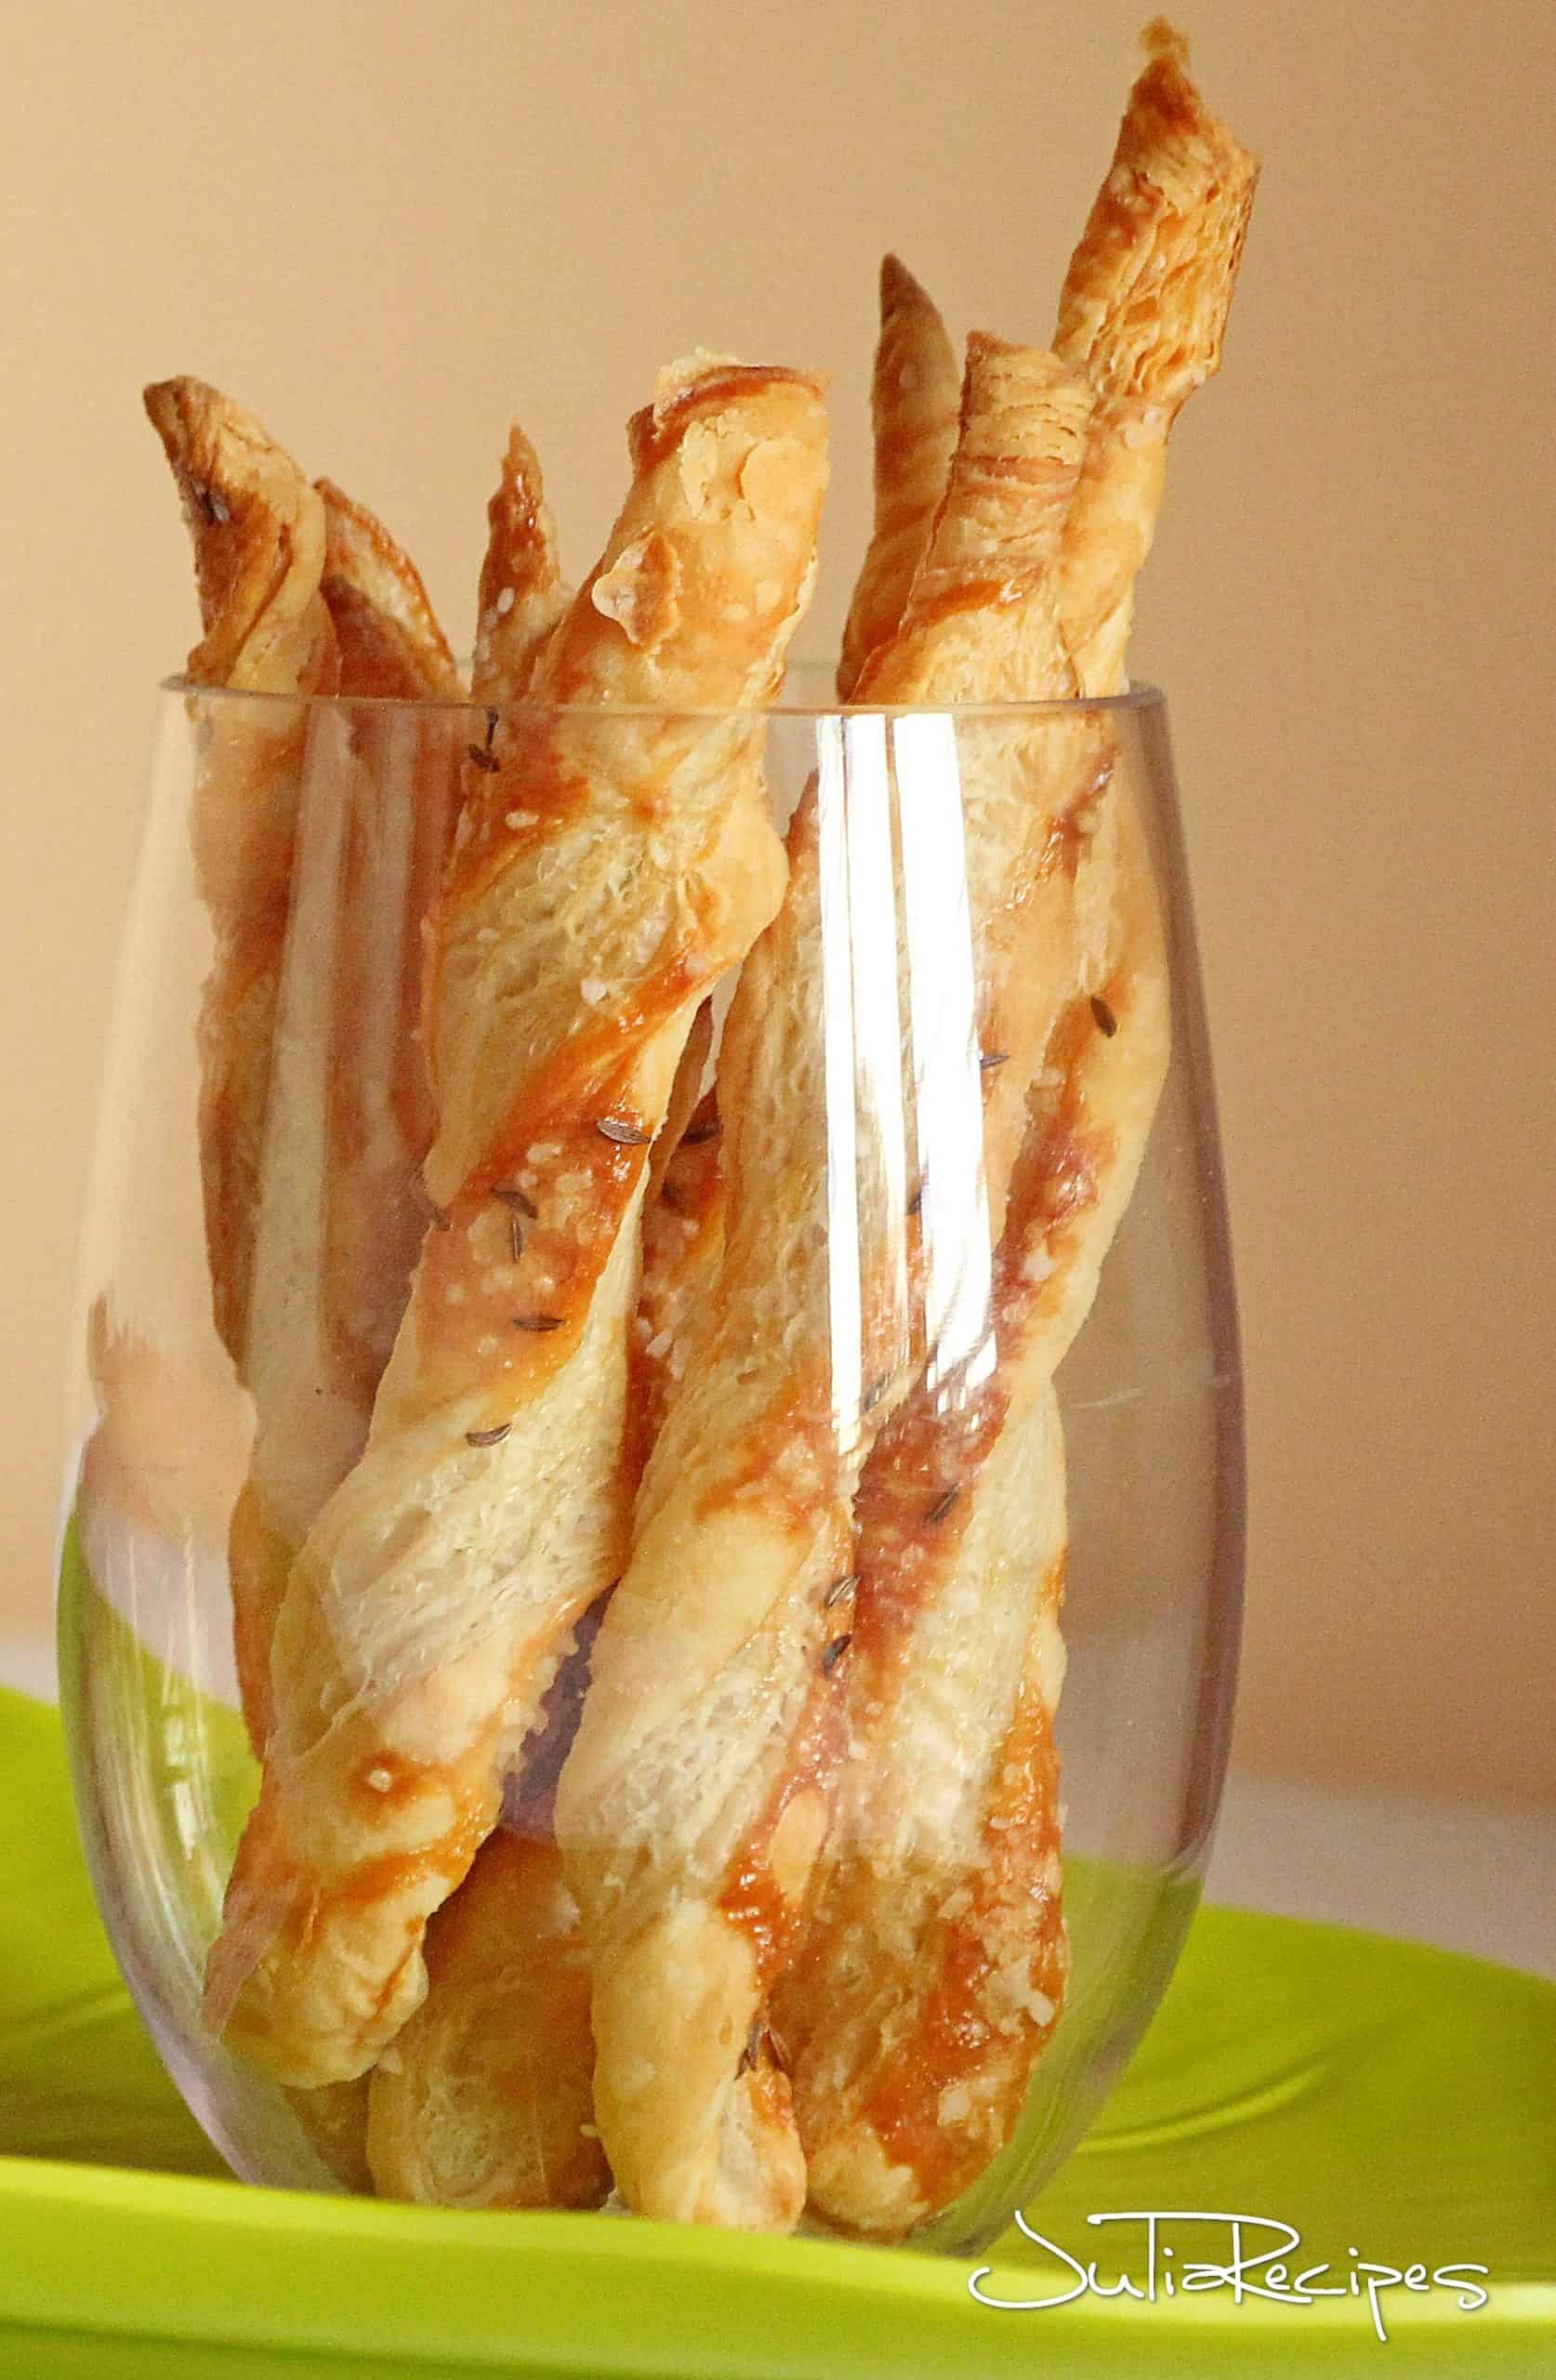 puff pastry sticks with parmesan in wine glass on green platter